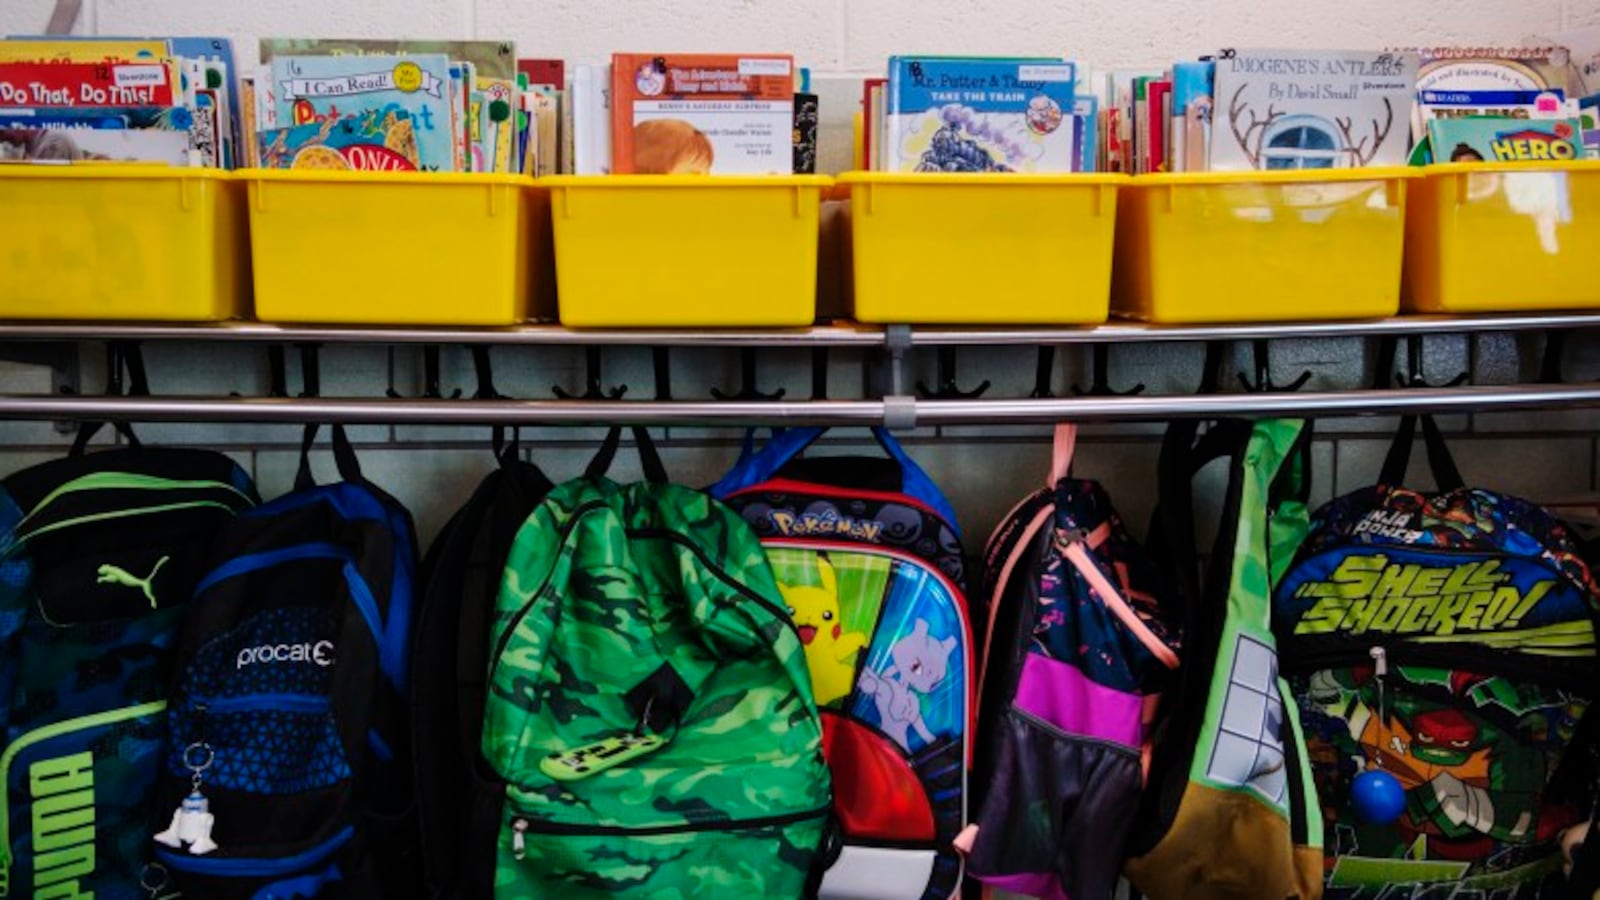 Books in yellow bins sit on a shelf and backpacks hang from hooks in a classroom.